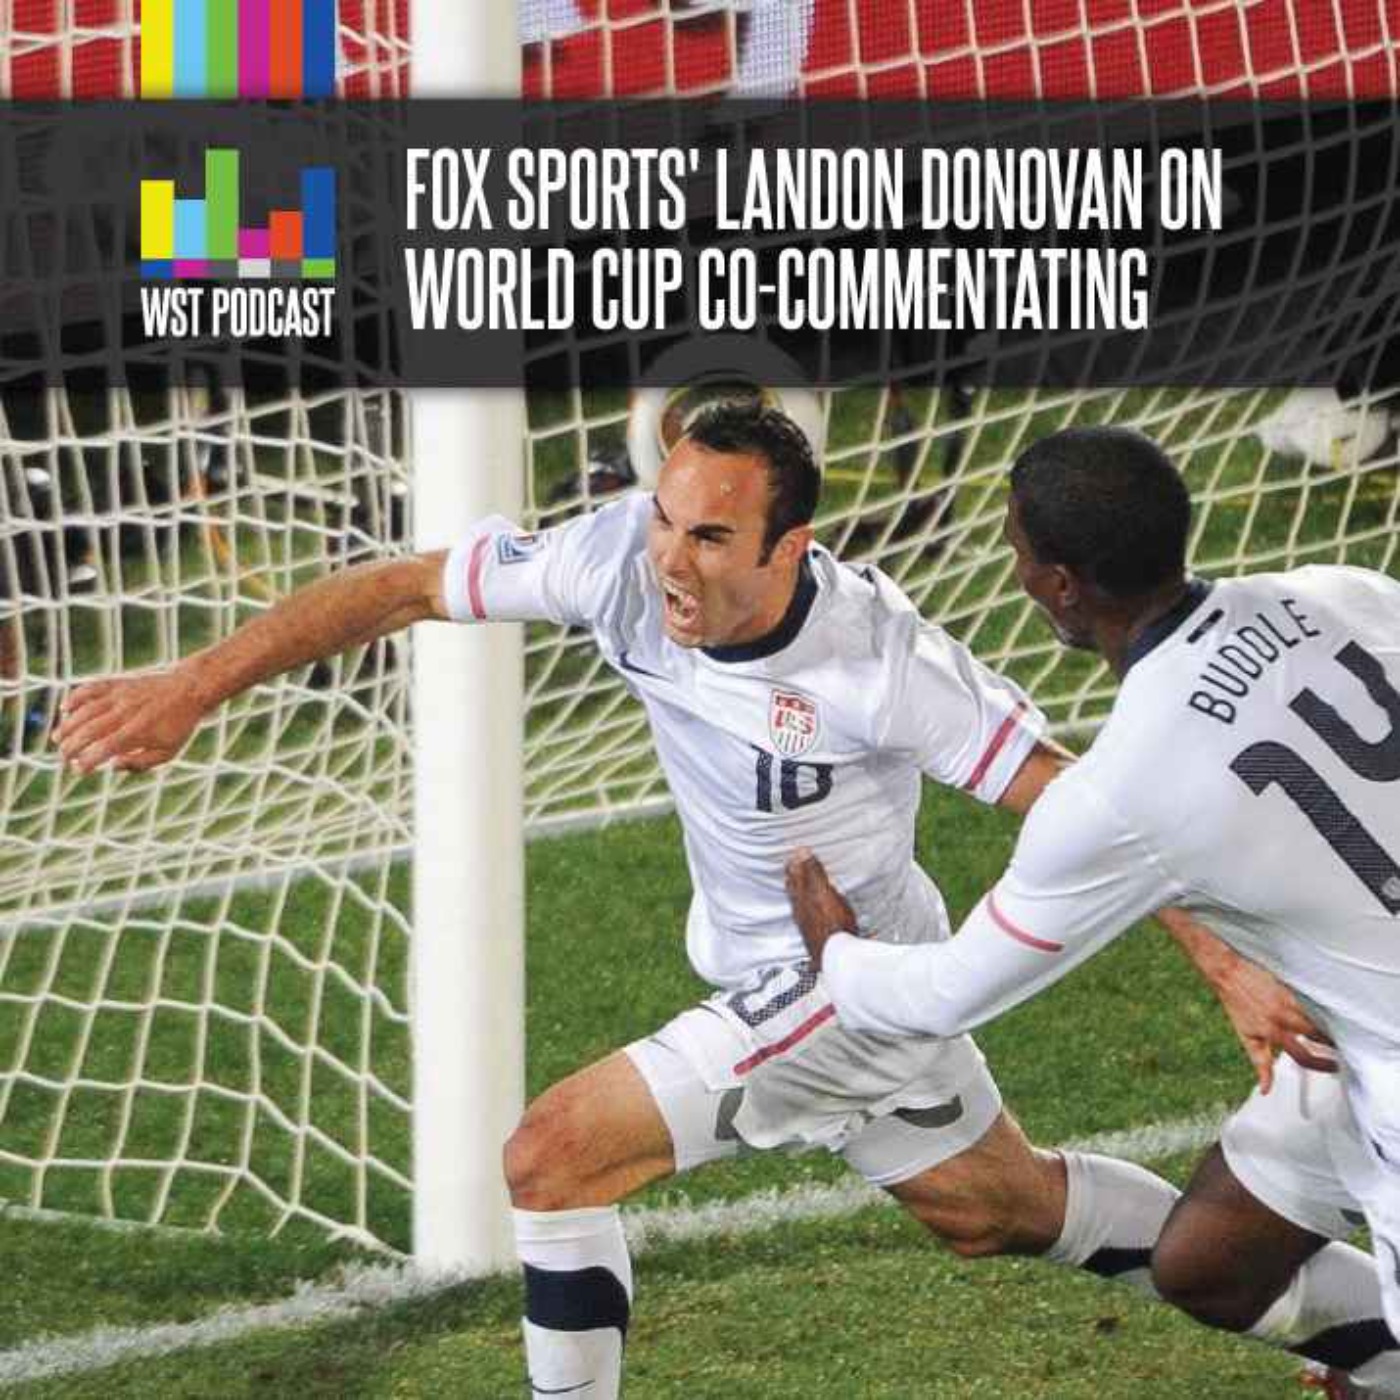 FOX Sports' Landon Donovan on World Cup co-commentating